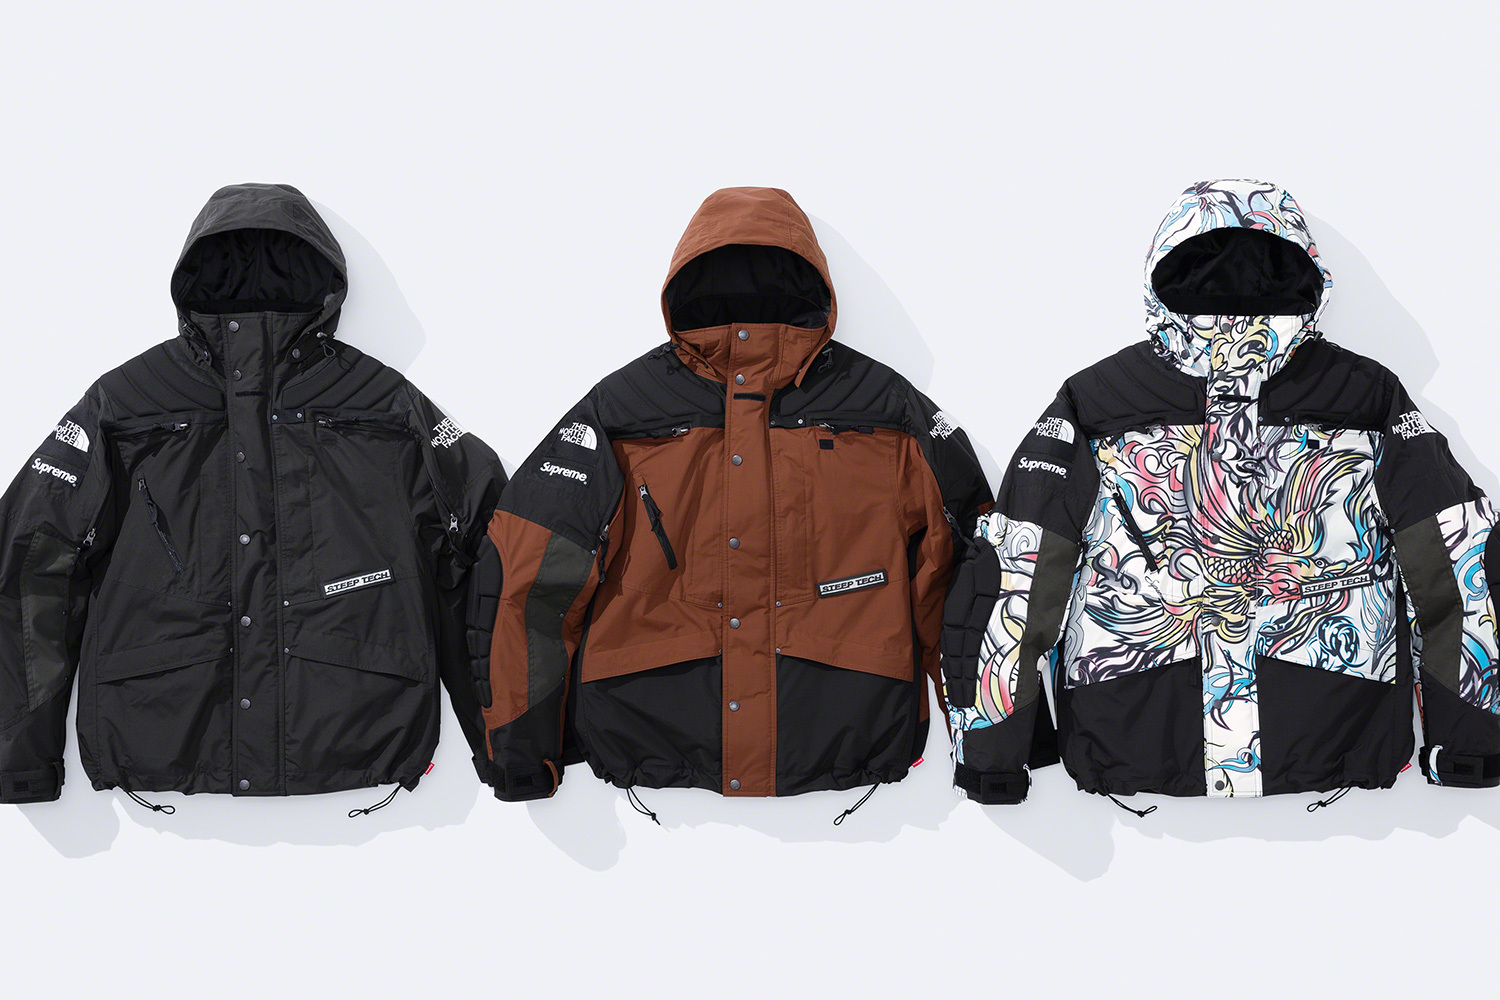 Supreme teams up with The North Face for Fall 2022